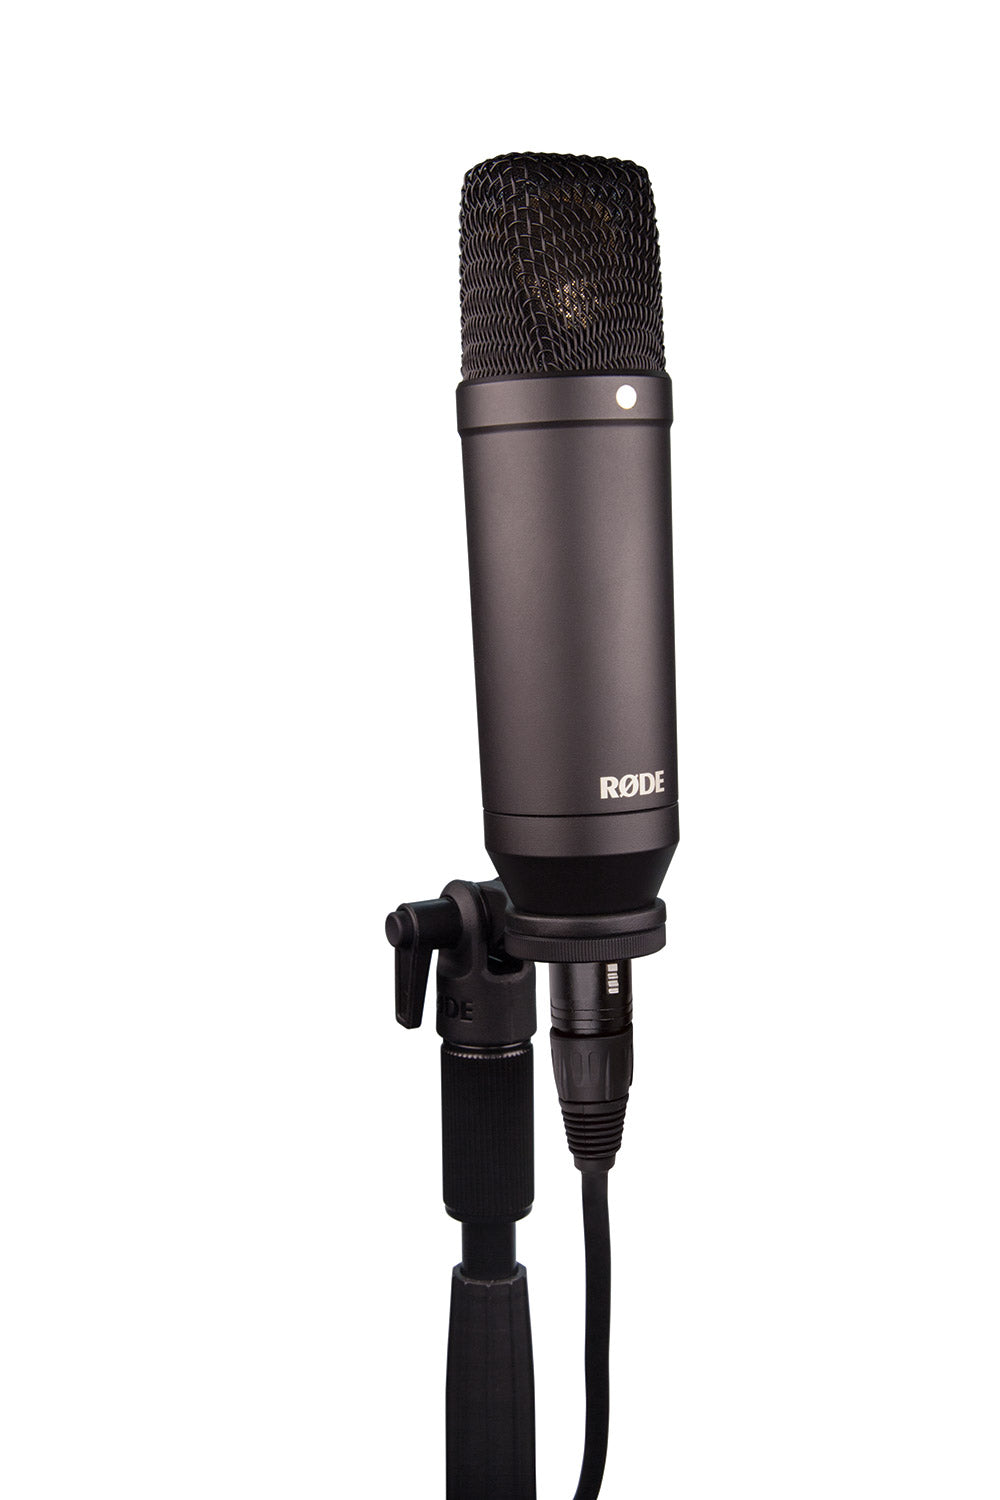 Rode NT1 Cardioid Condenser Microphone with Shockmount